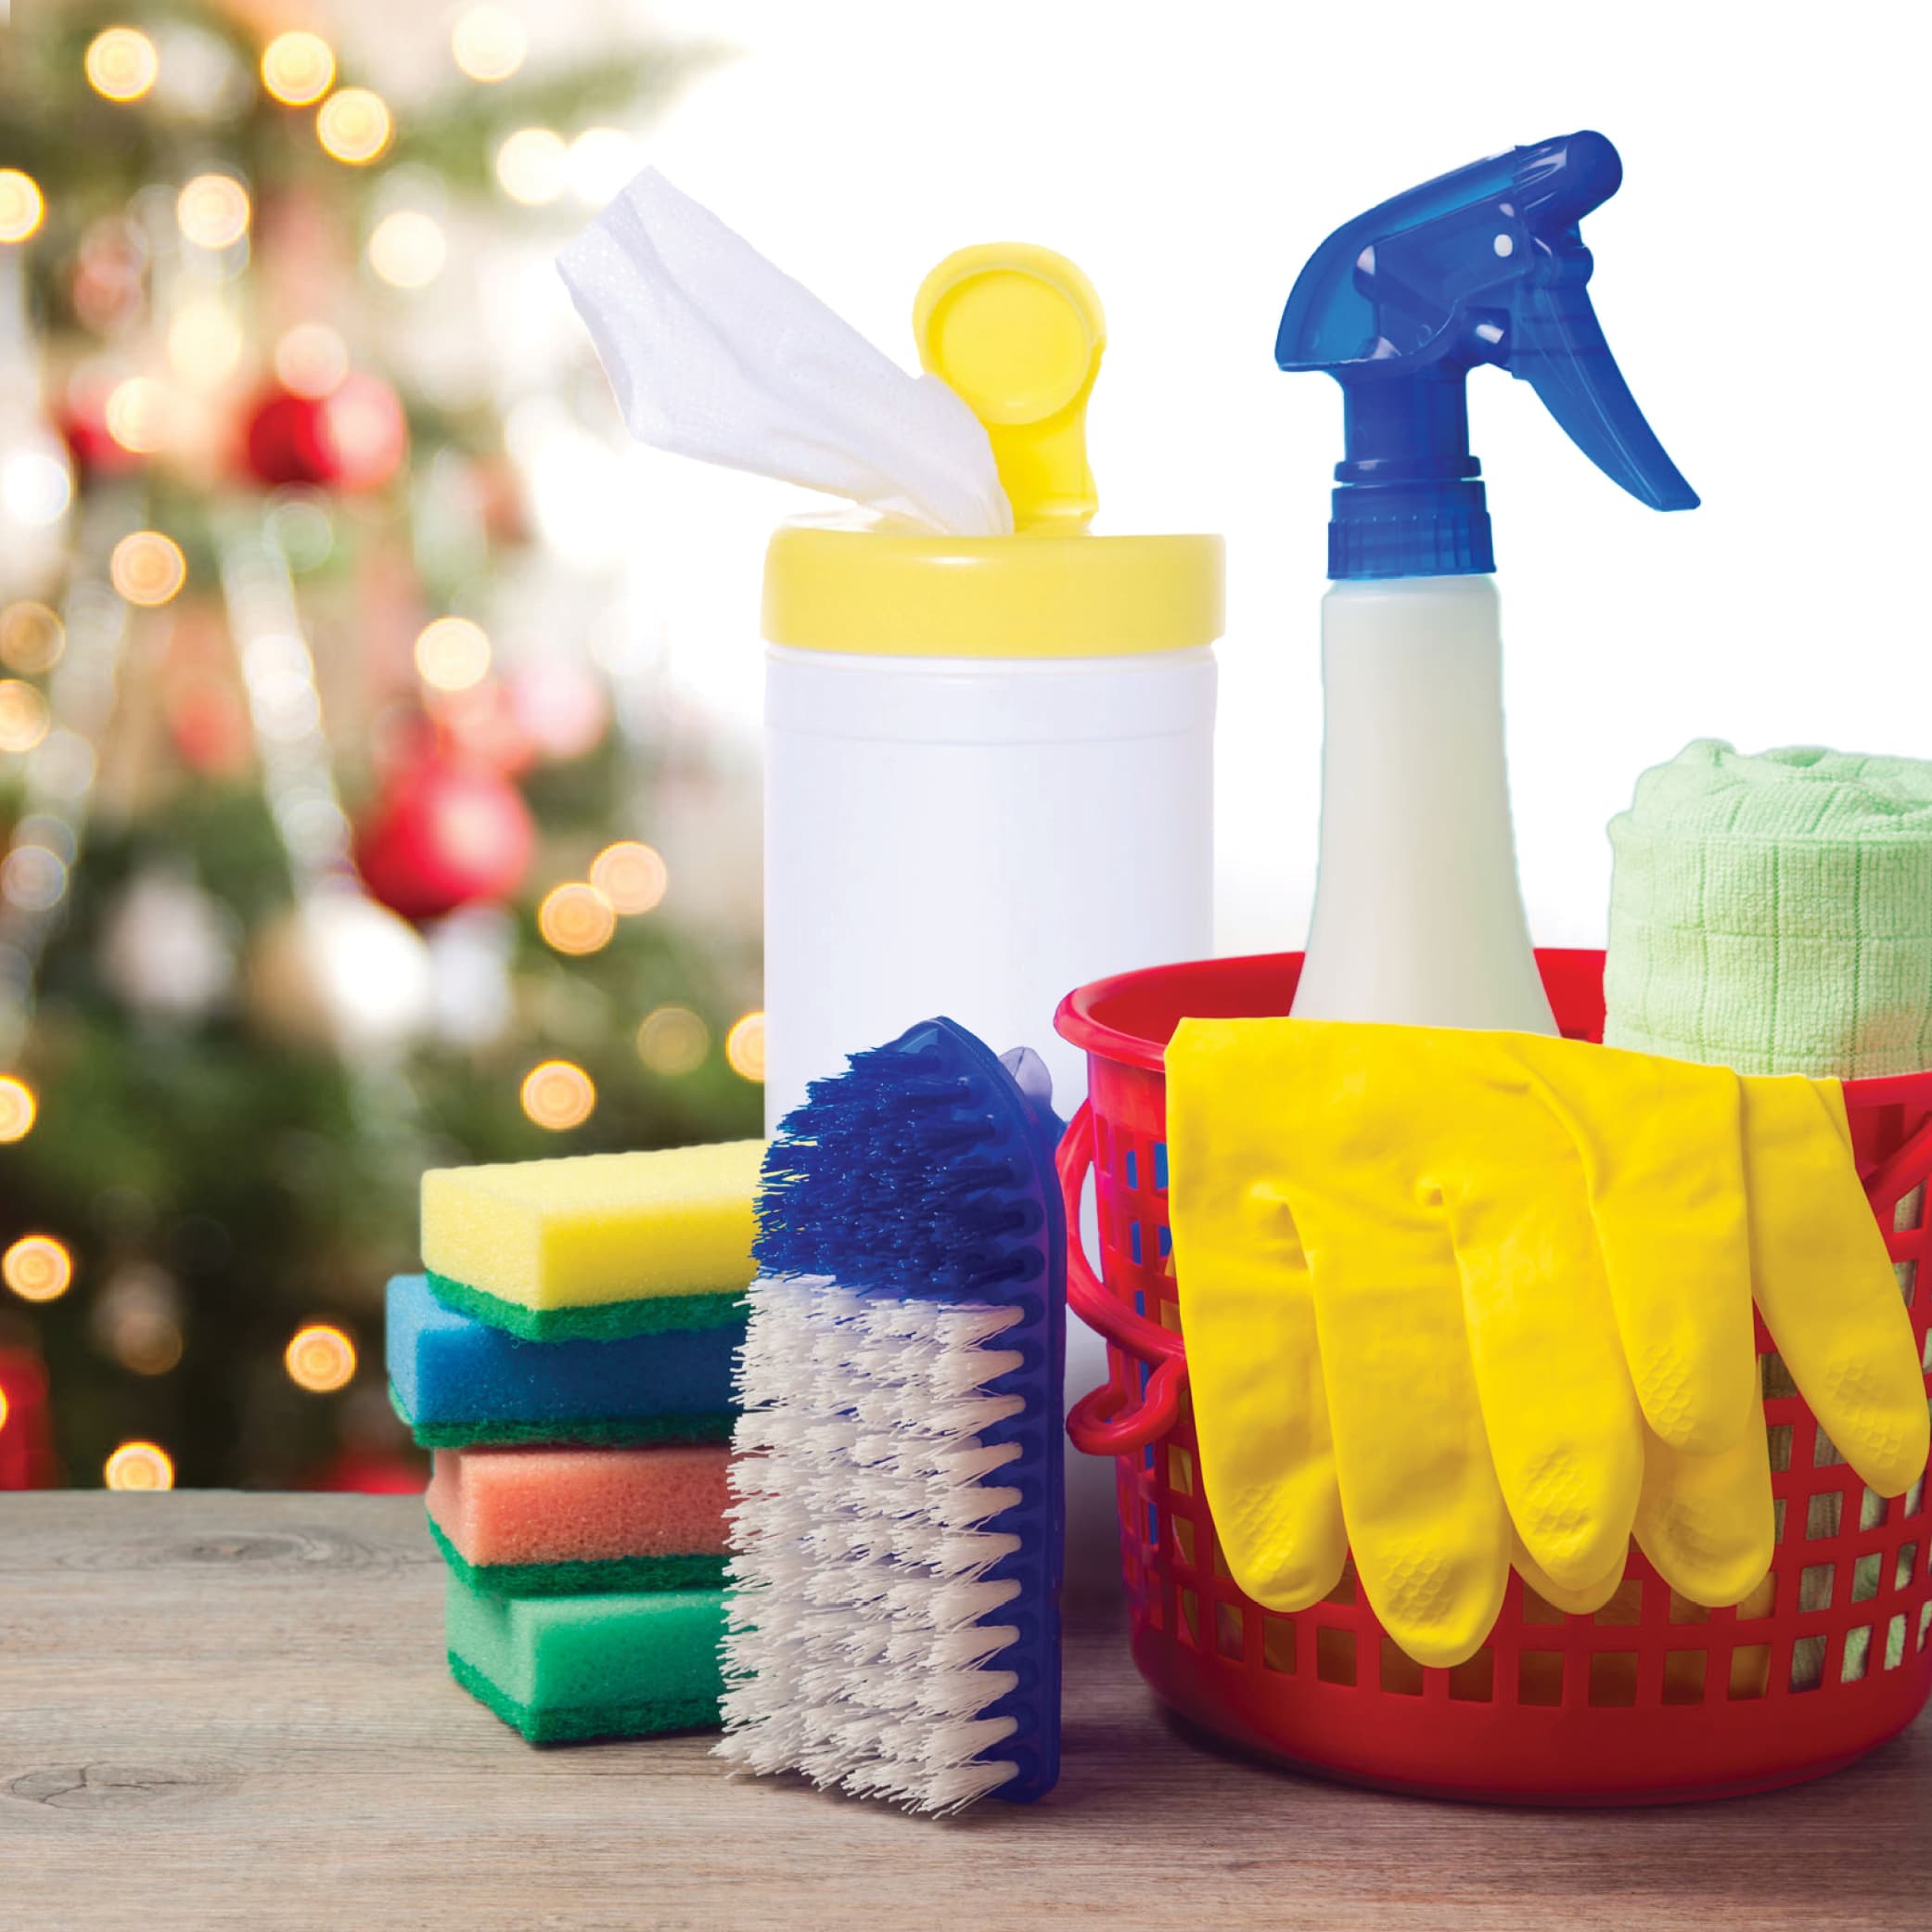 Update_Speed-Cleaning-For-The-Holidays-SQUARE22.jpg (2083Ã2083)